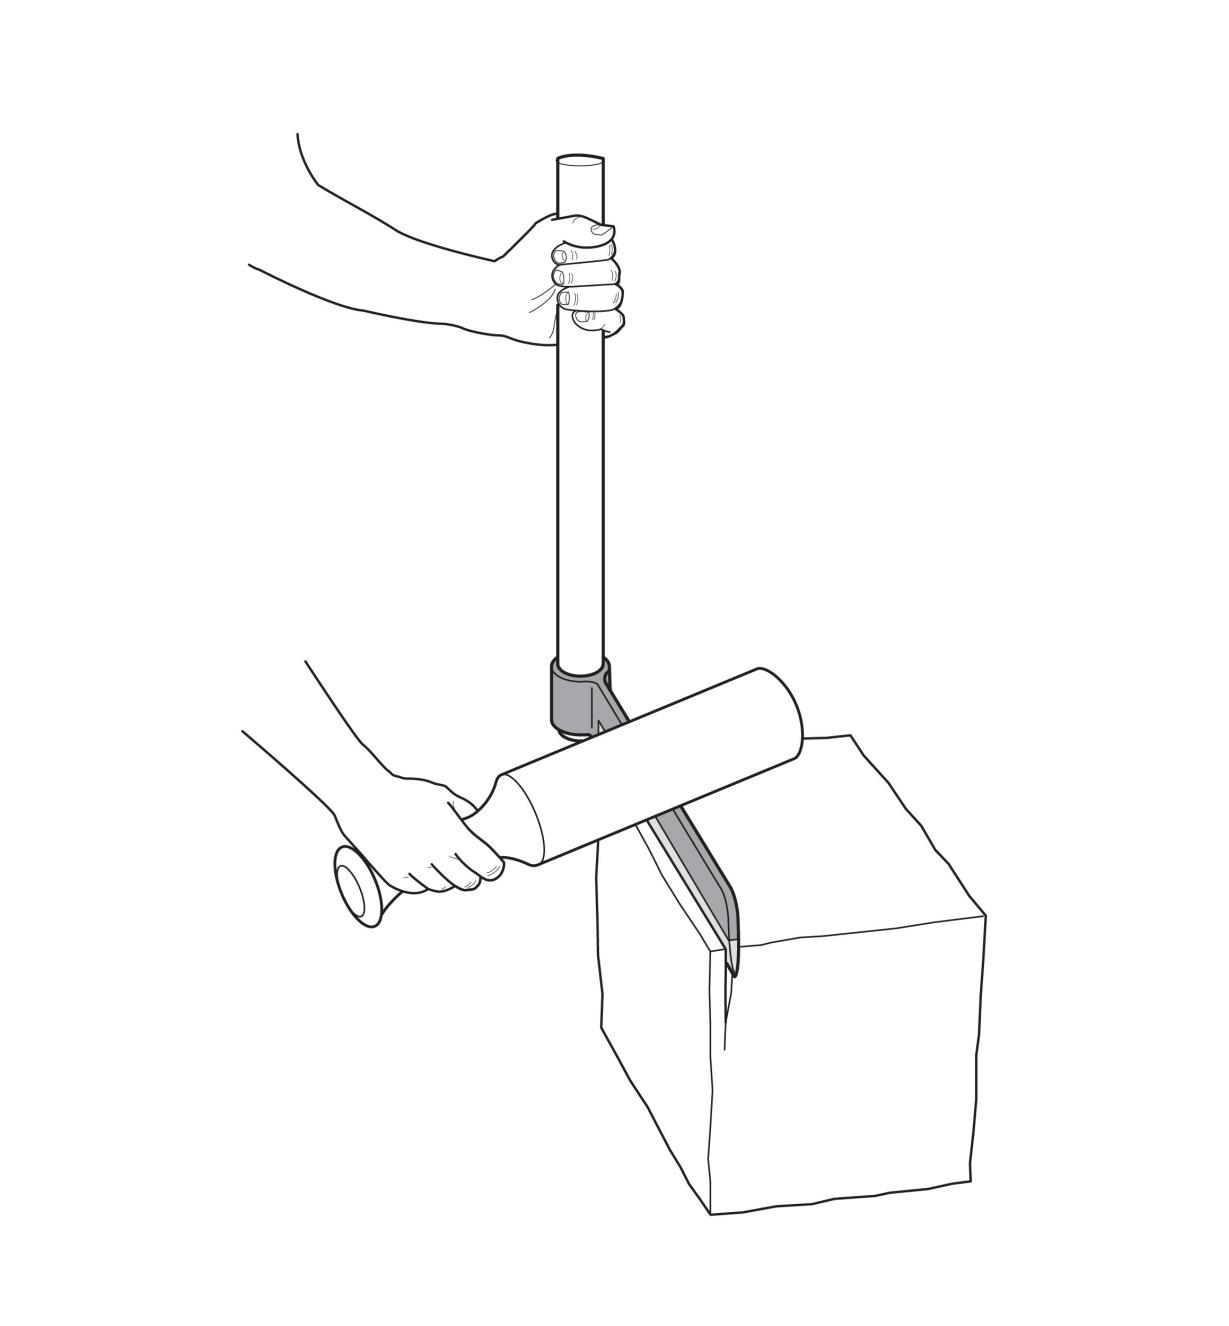 Illustration of a person using a froe and mallet to split a block of wood